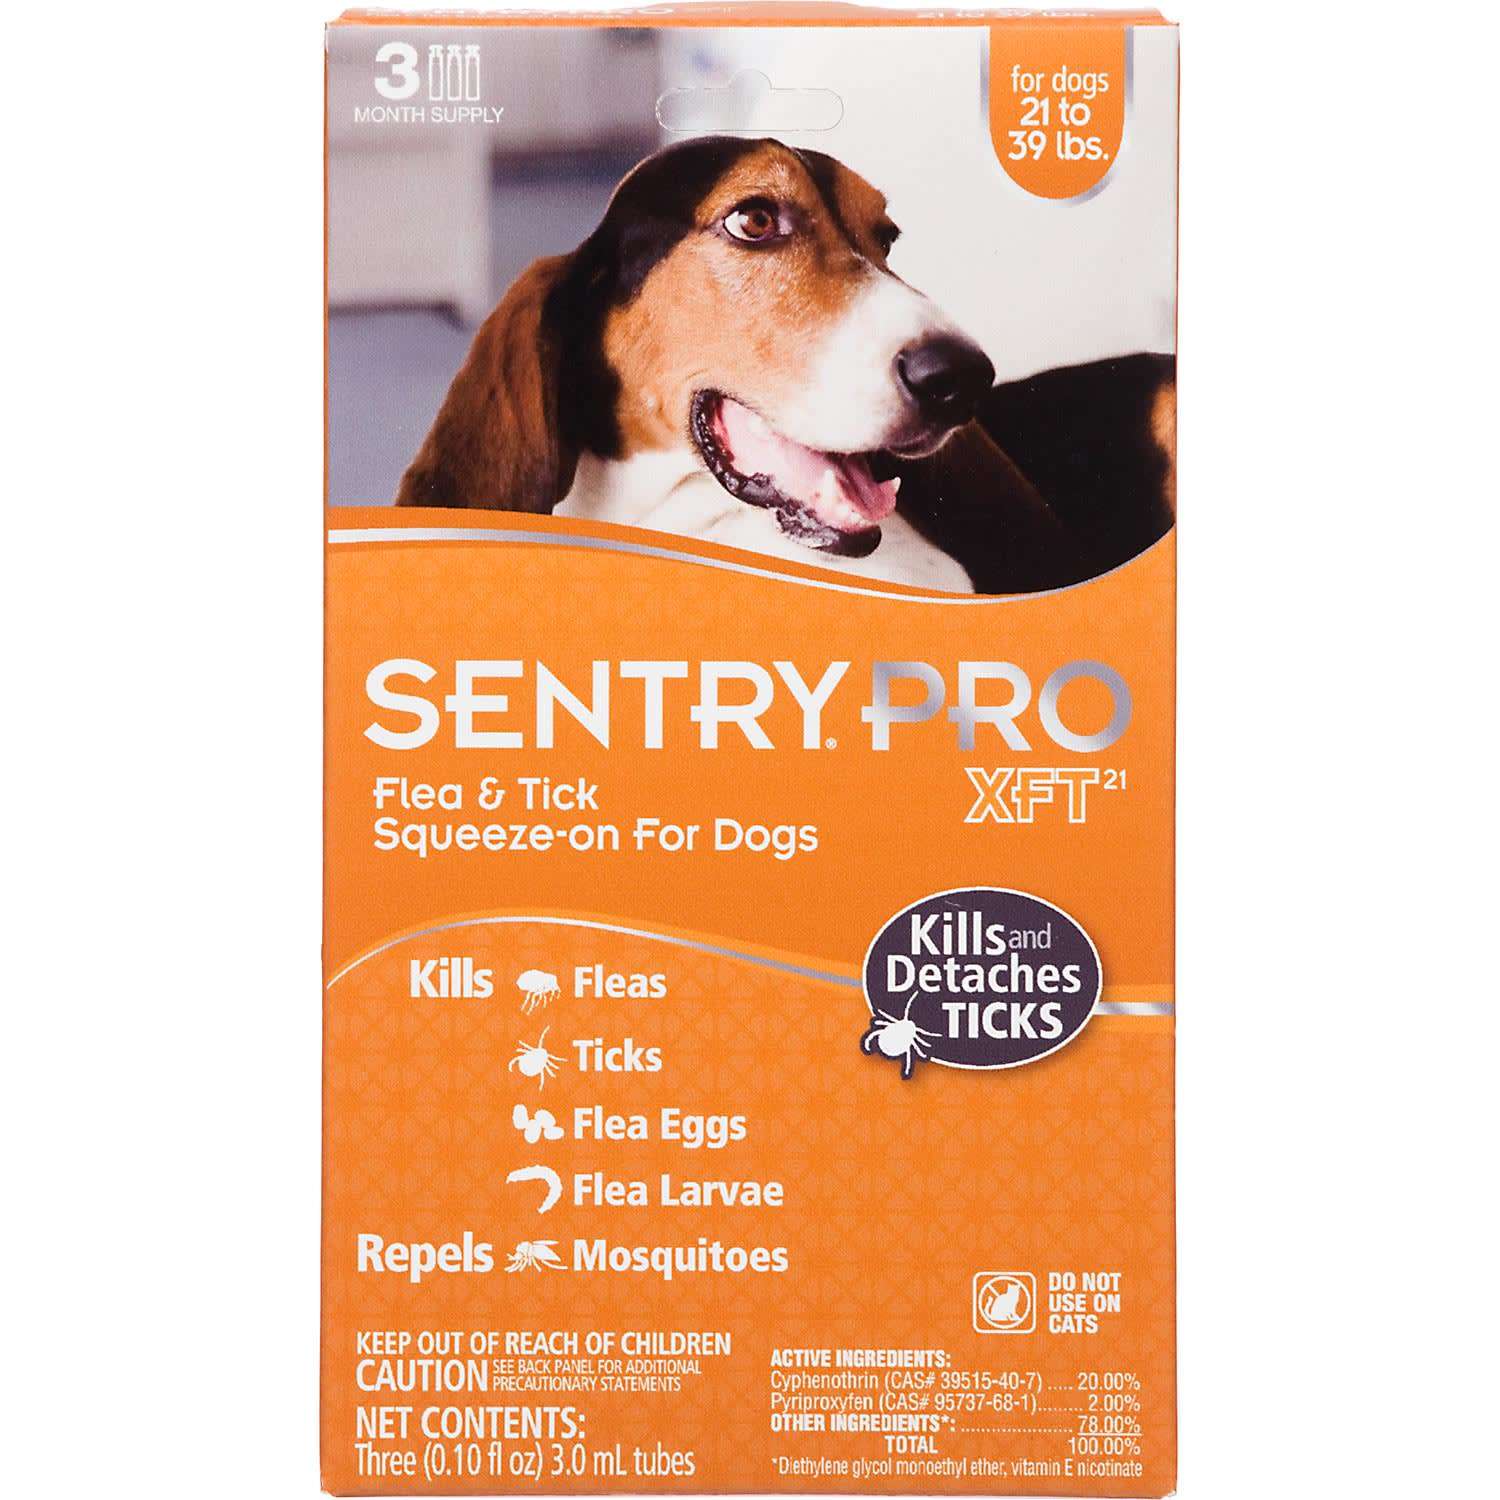 Sentry Pro XFT Squeeze-On Dogs 21 to 39 lbs. Flea & Tick Treatment, 3 Month Supply, 3 ML